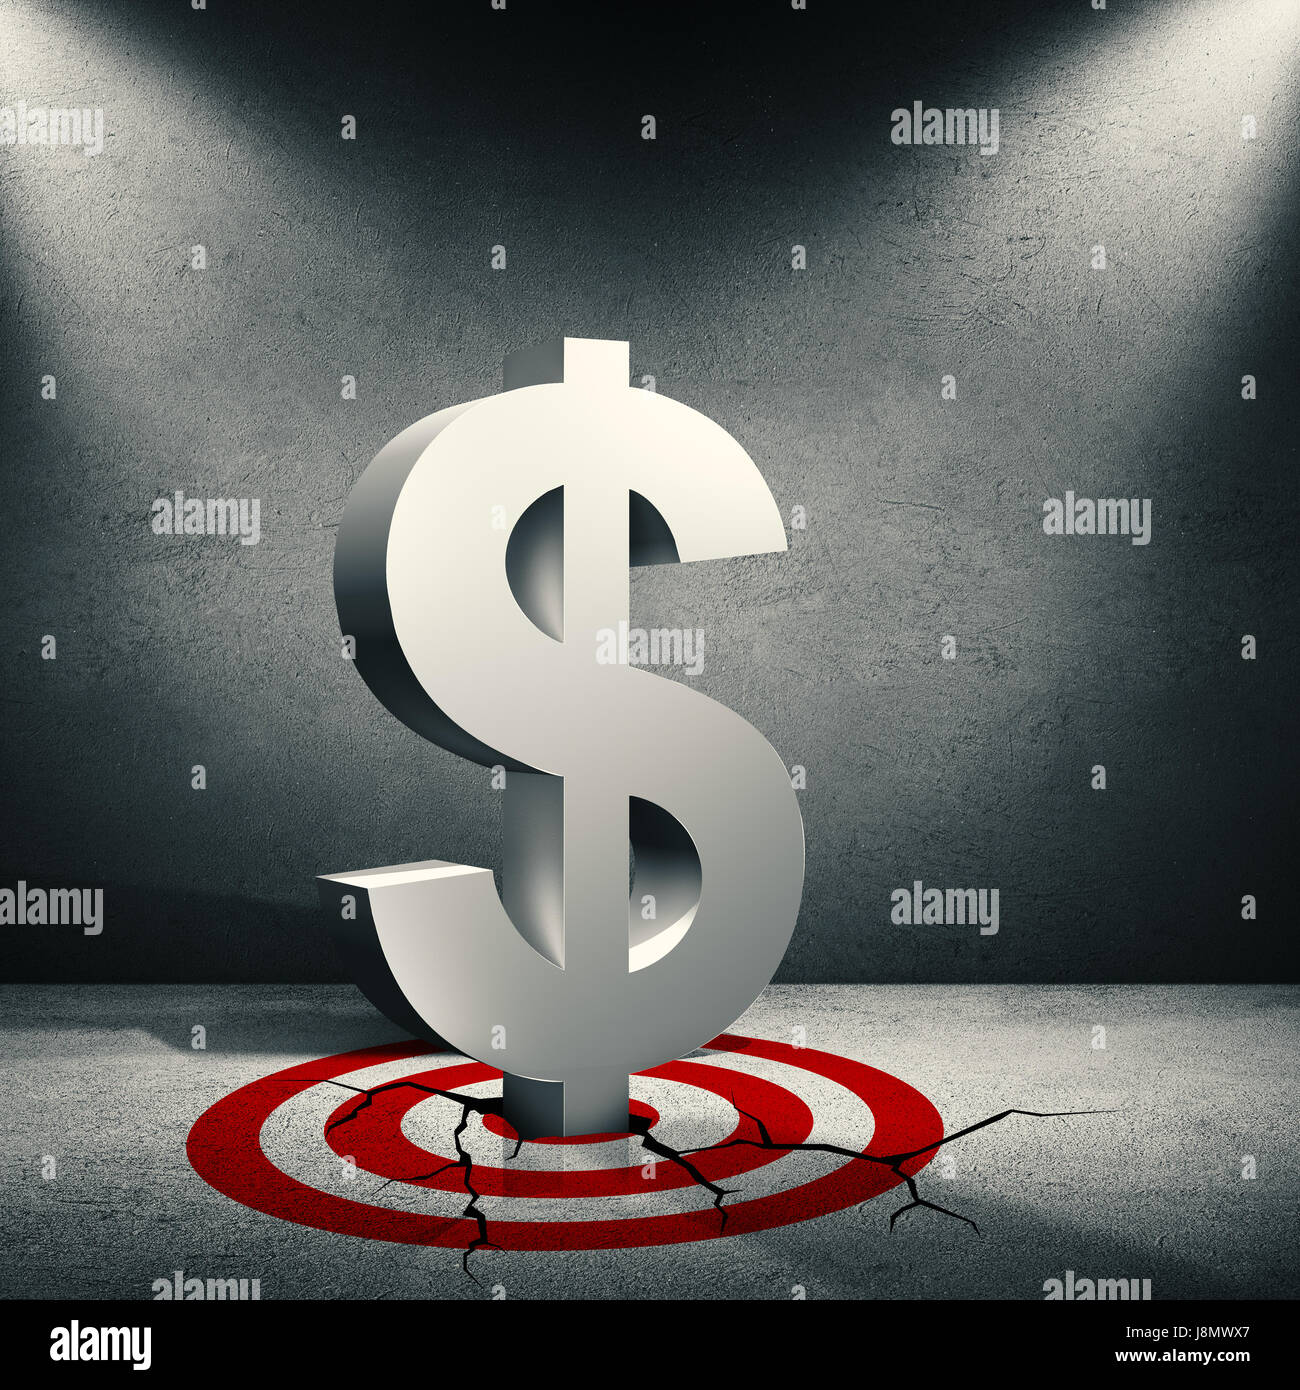 3d illustration of volumetric USA dollar sign crashed in the red target on the floor of old concrete interior. Floor with cracks. 3d rendering Stock Photo